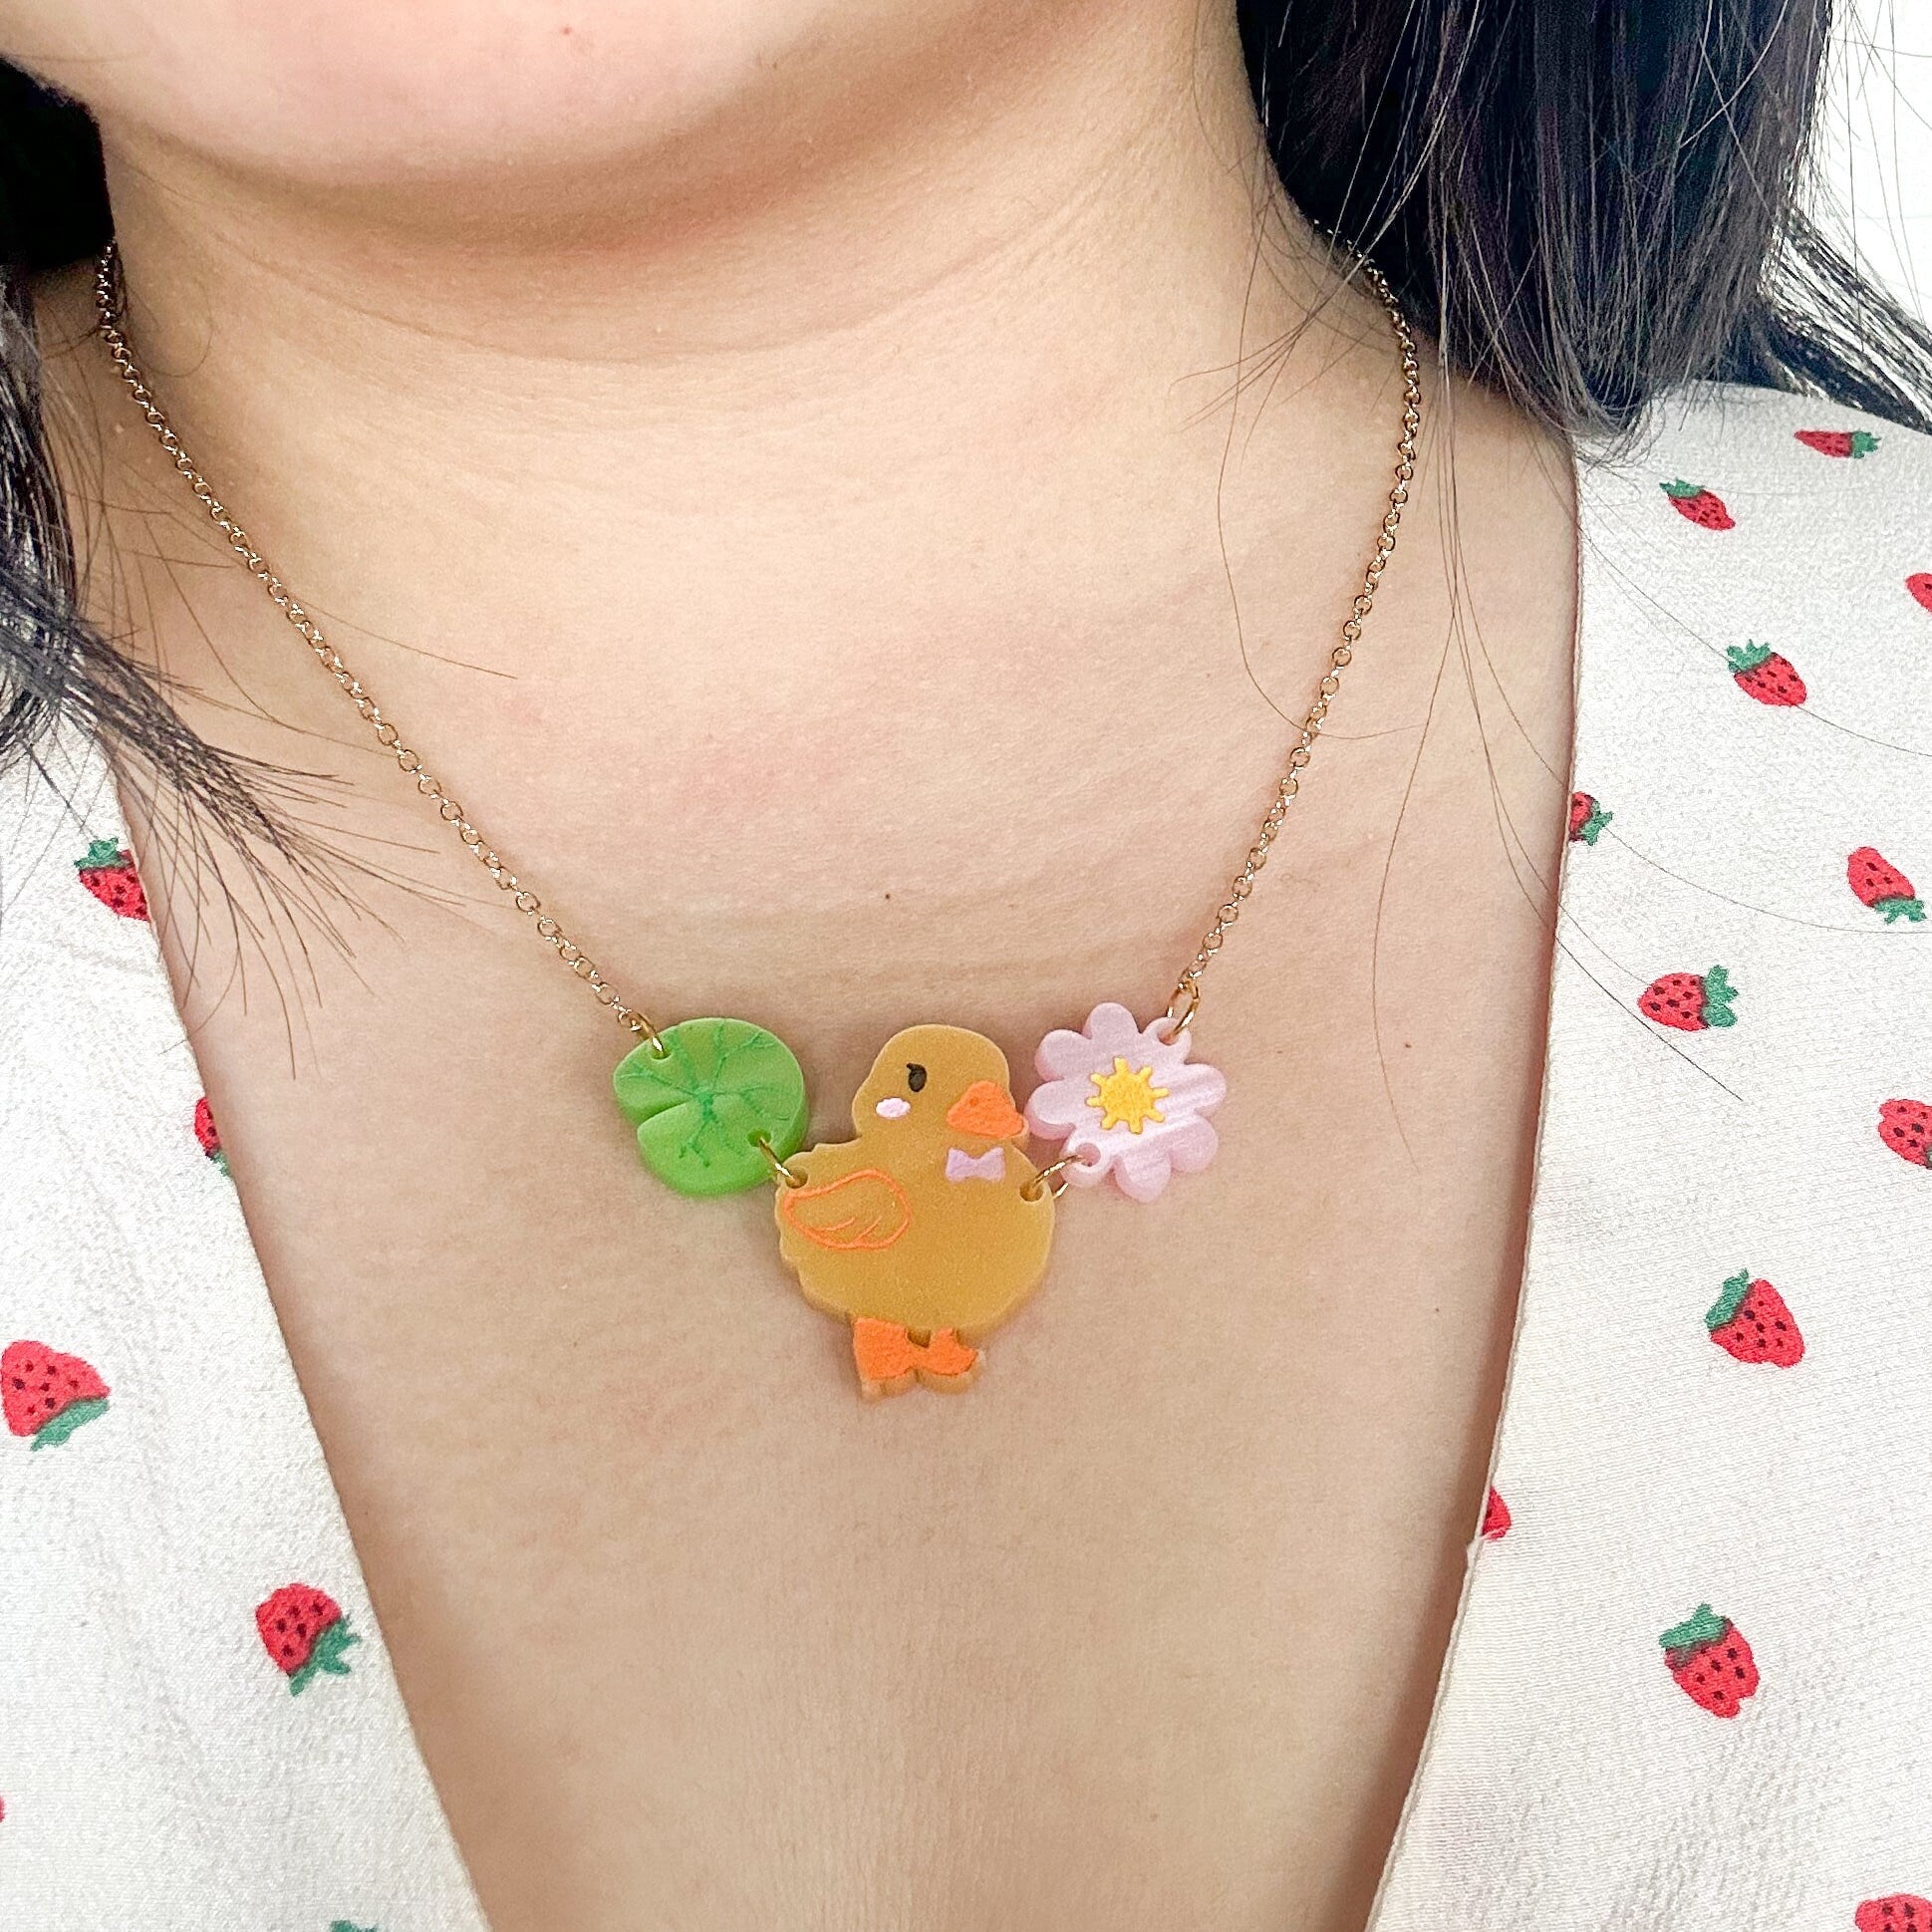 Rubber Duckie Necklace – Lexi Handcrafted Jewelry